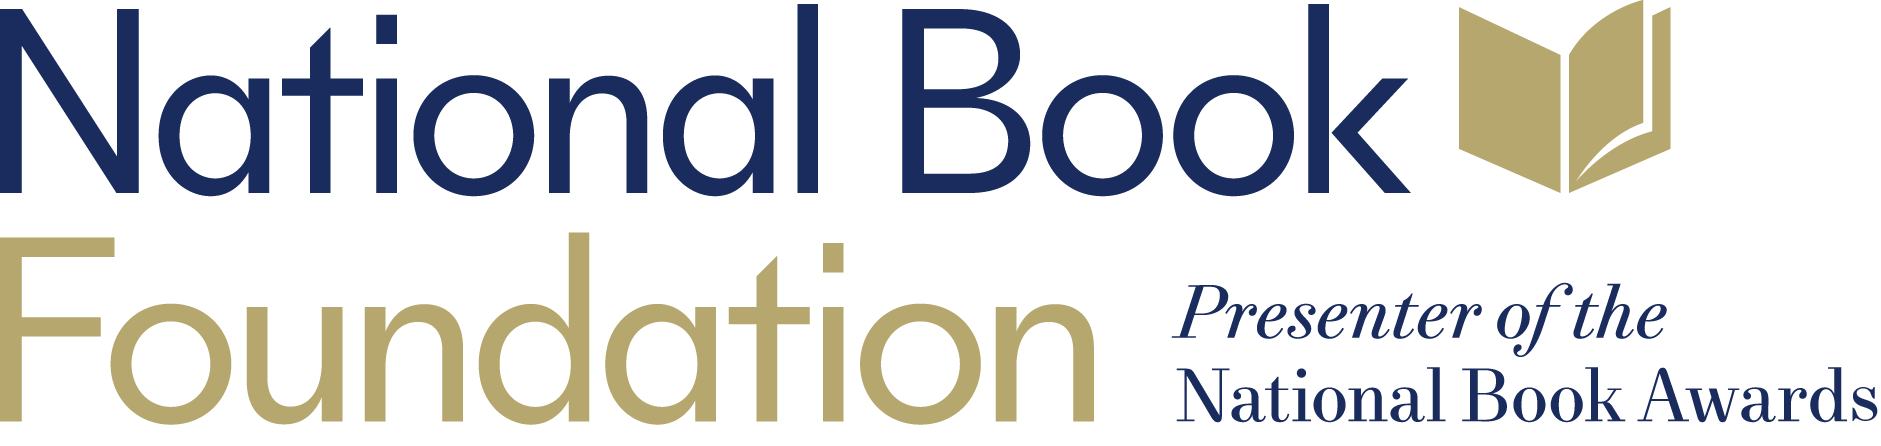 National Book Foundation